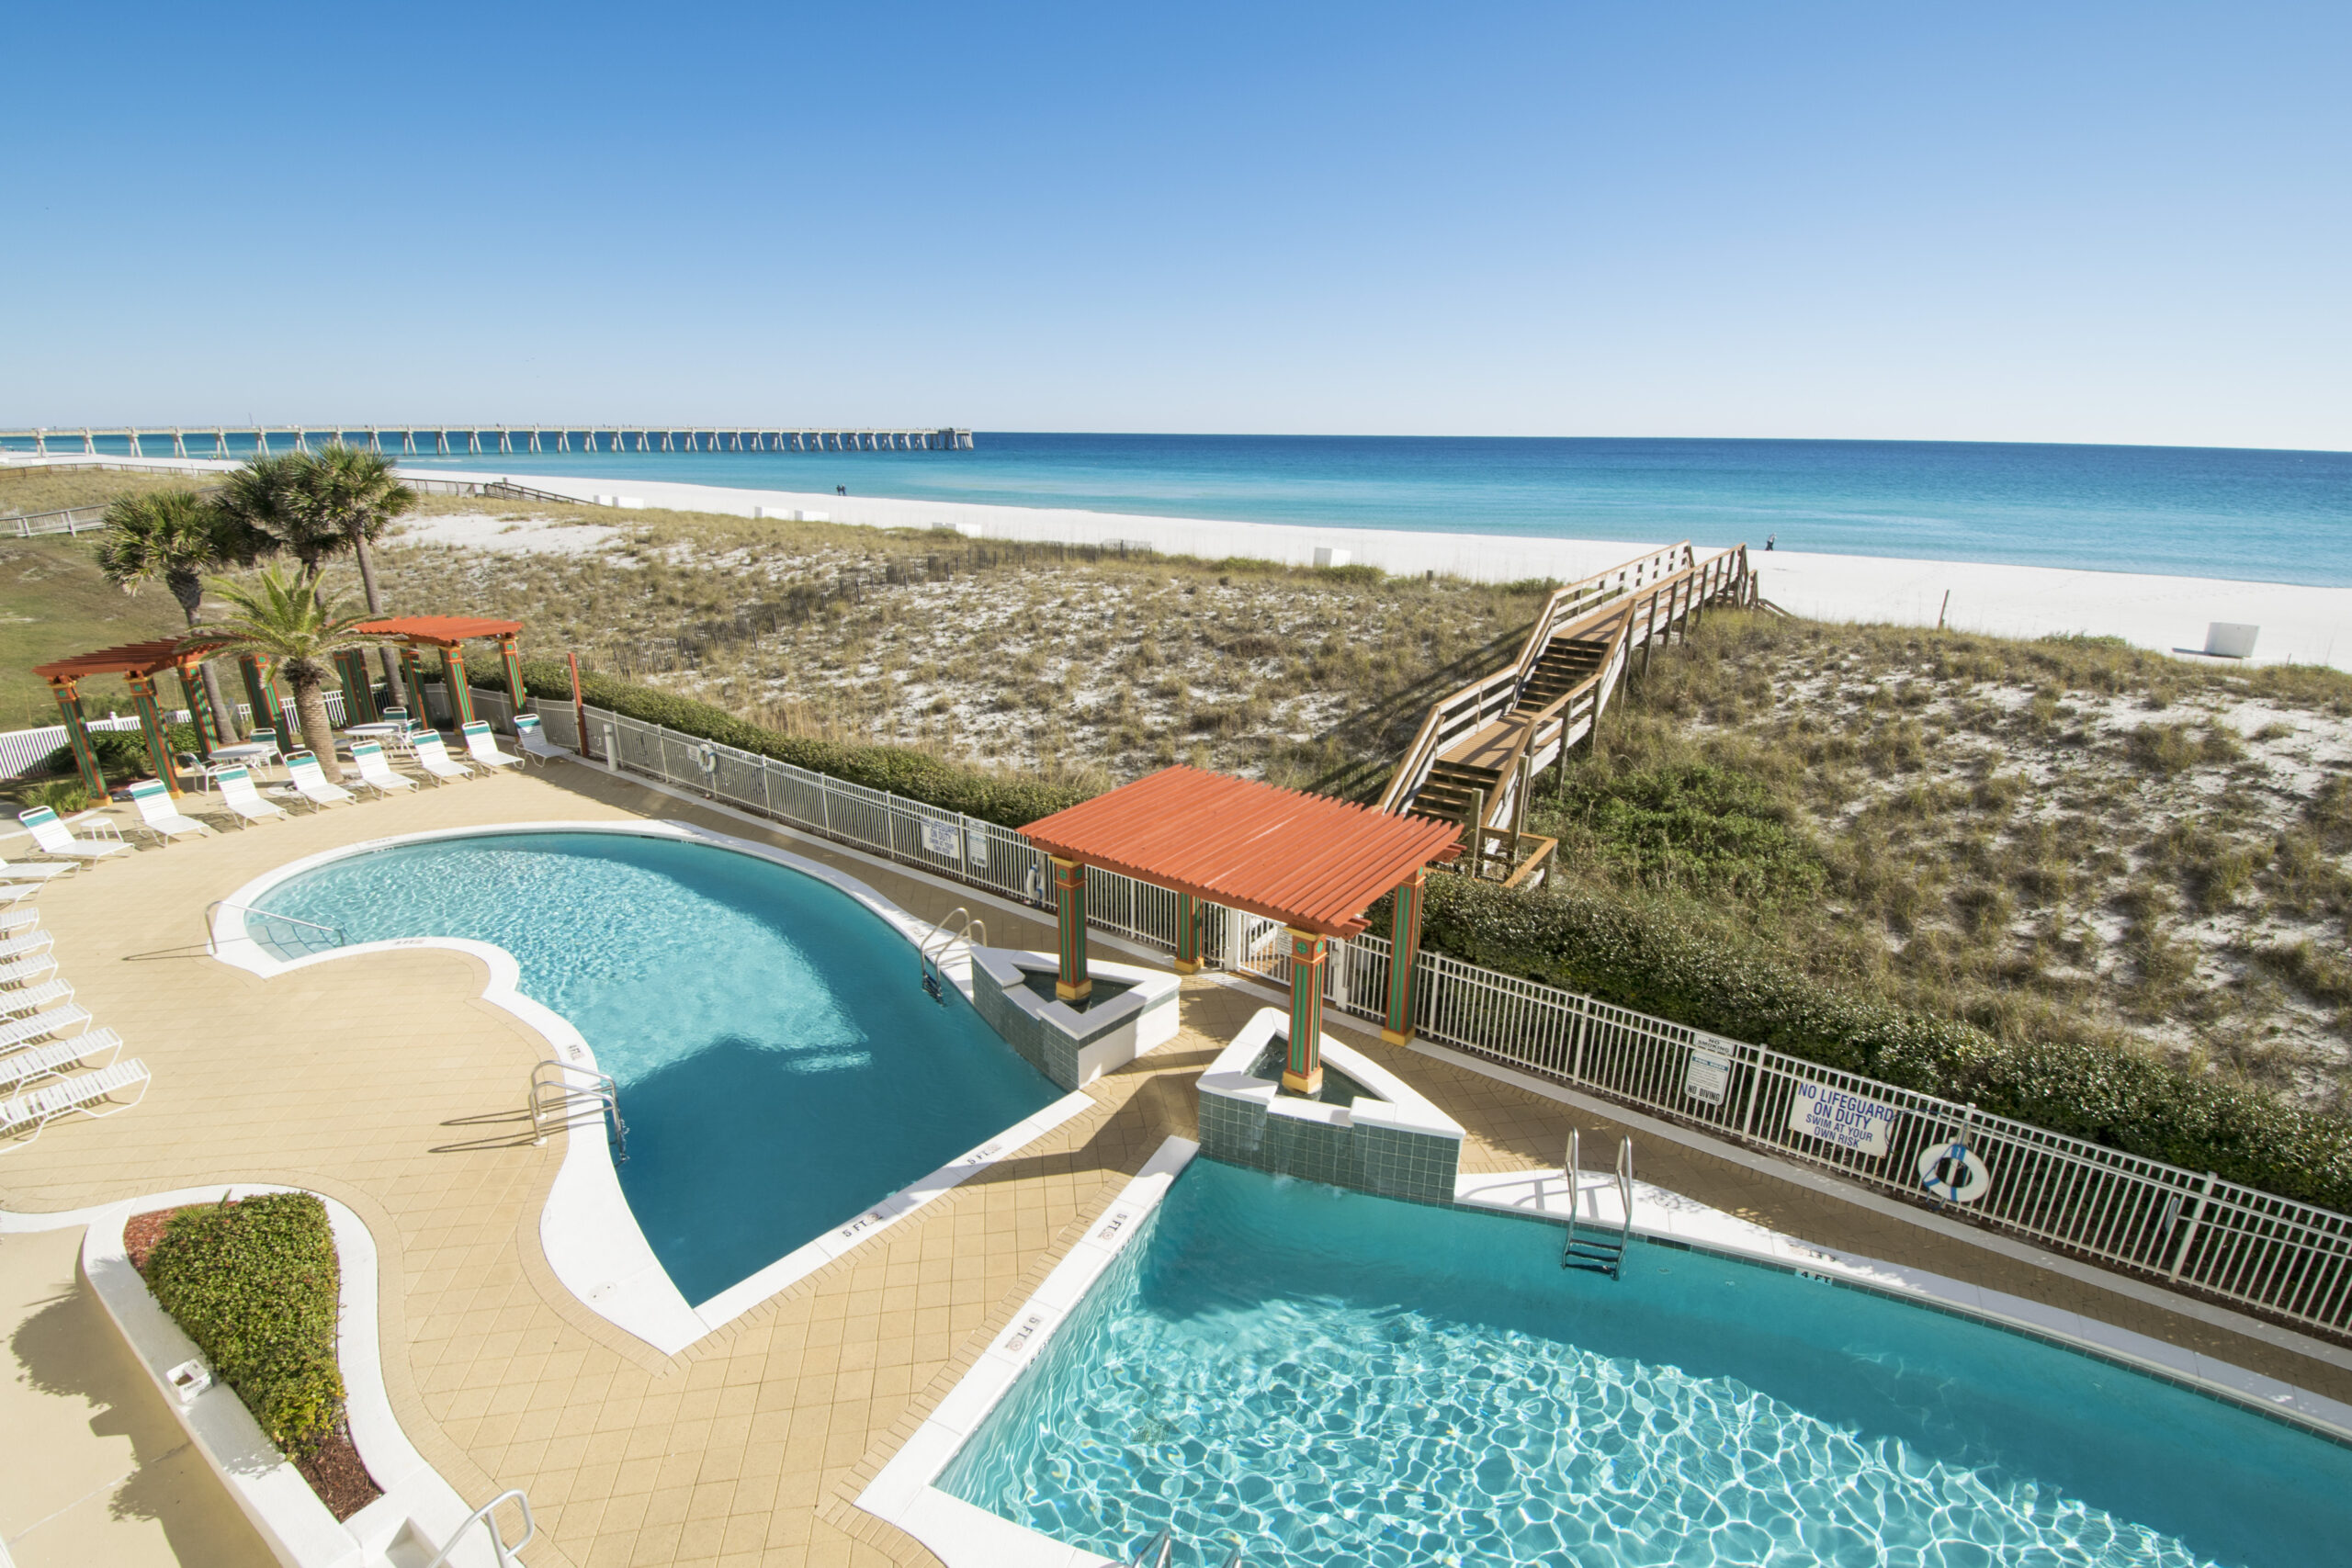 The Pearl of Navarre Beach Save Money With Our 1 Insider Tip